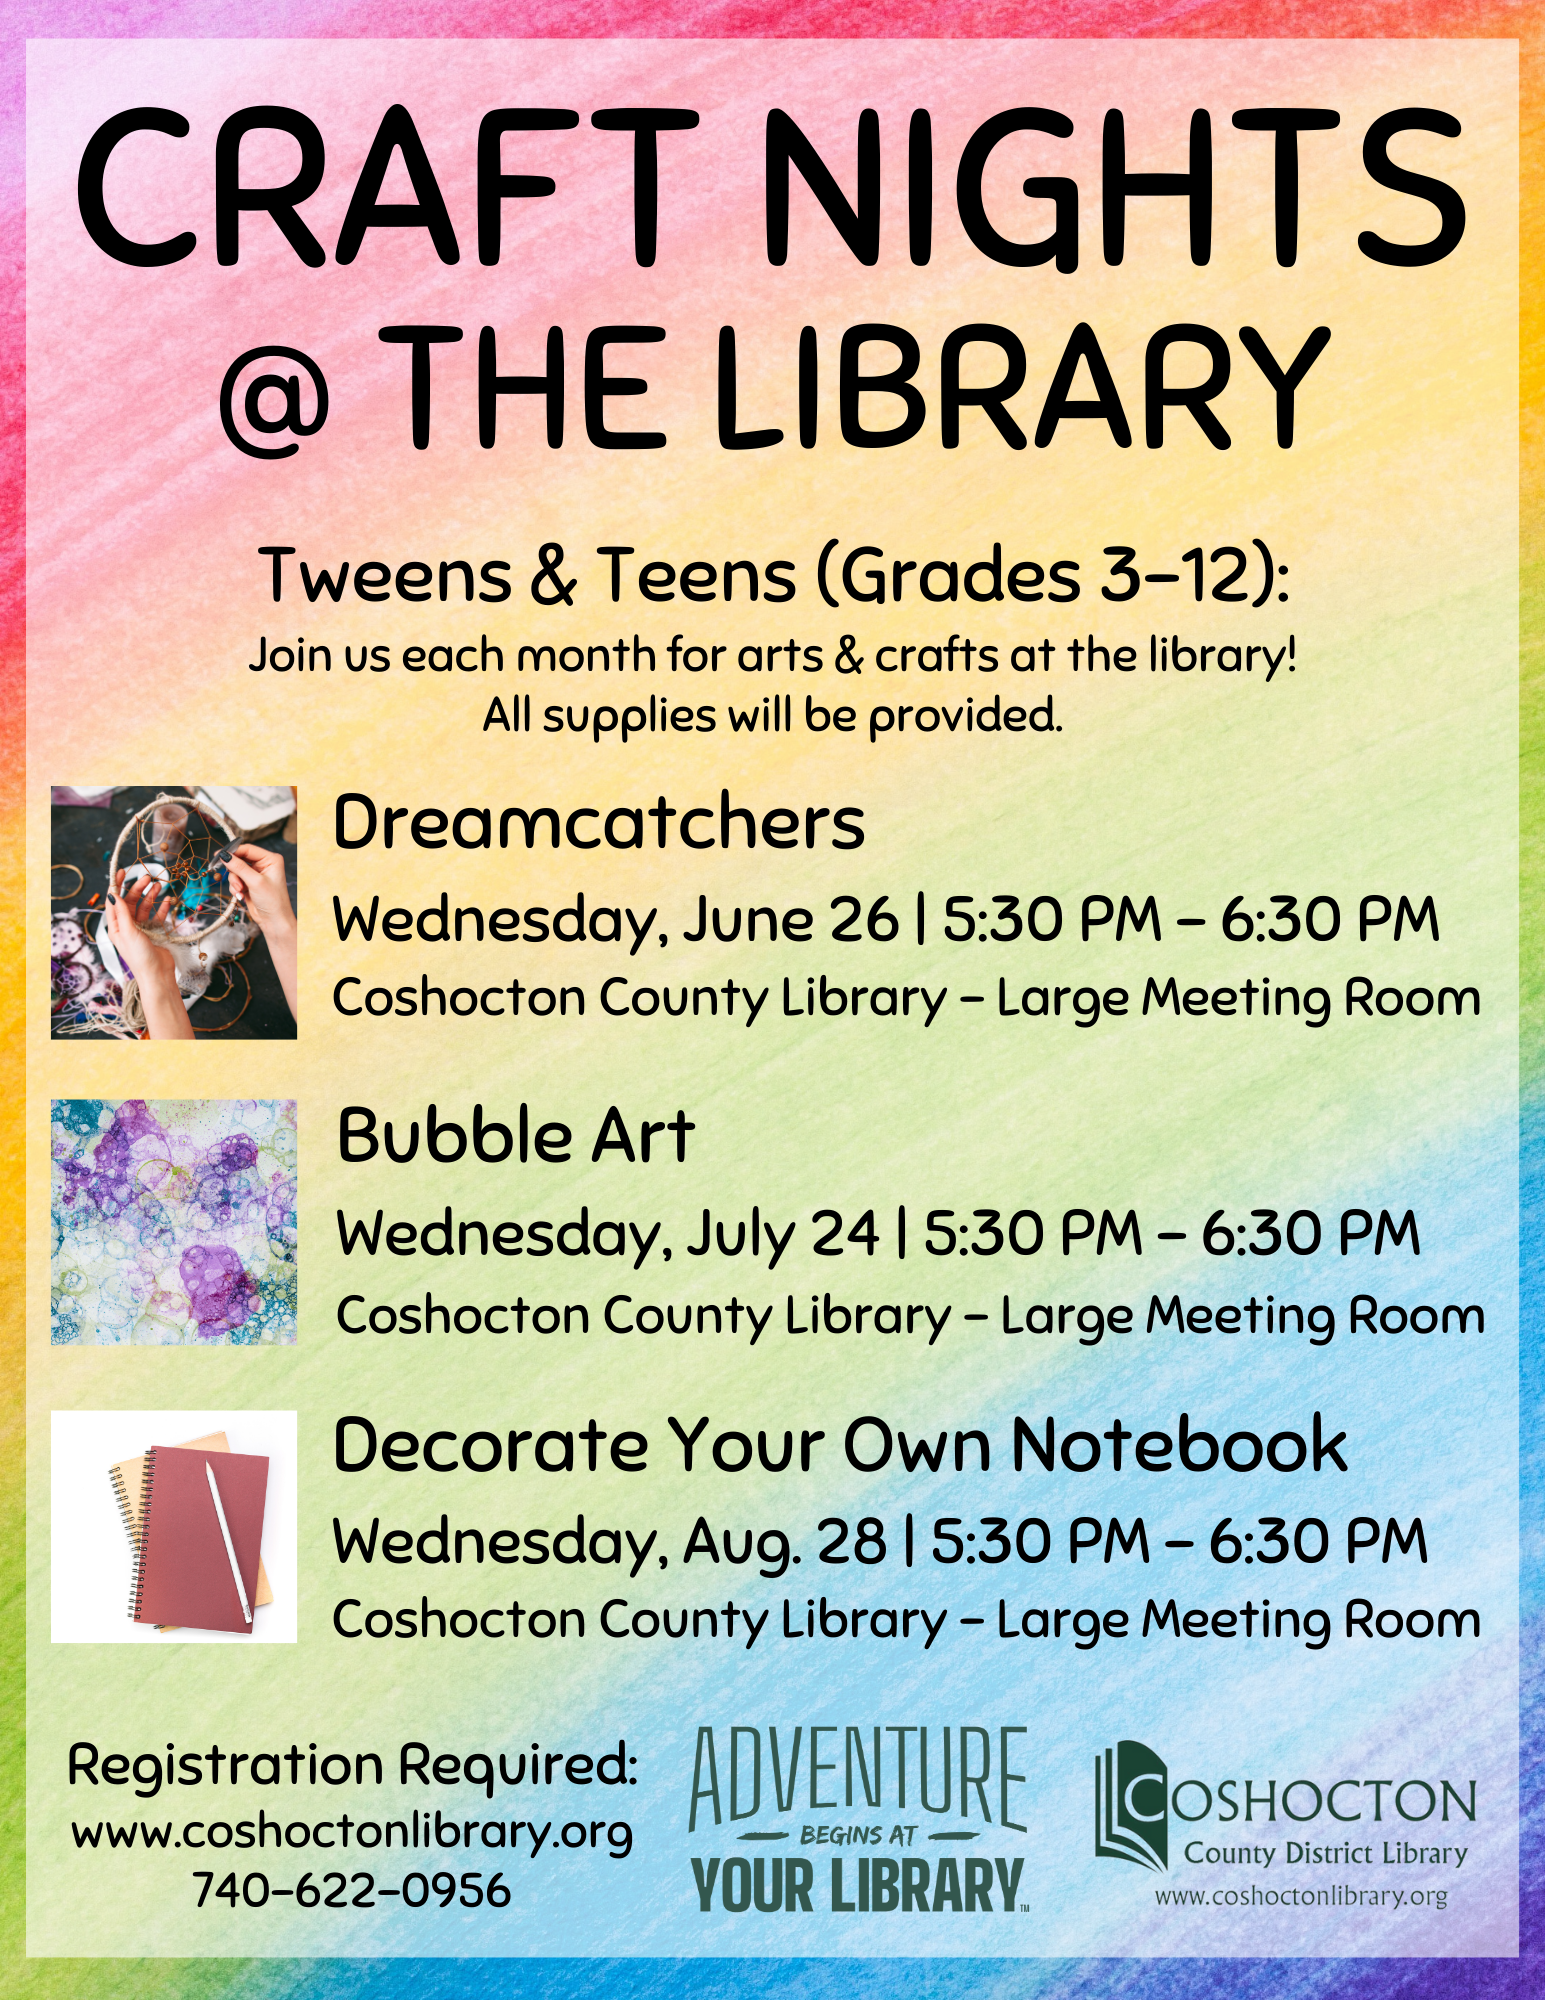 Craft Nights @ the Library flyer (Coshocton)